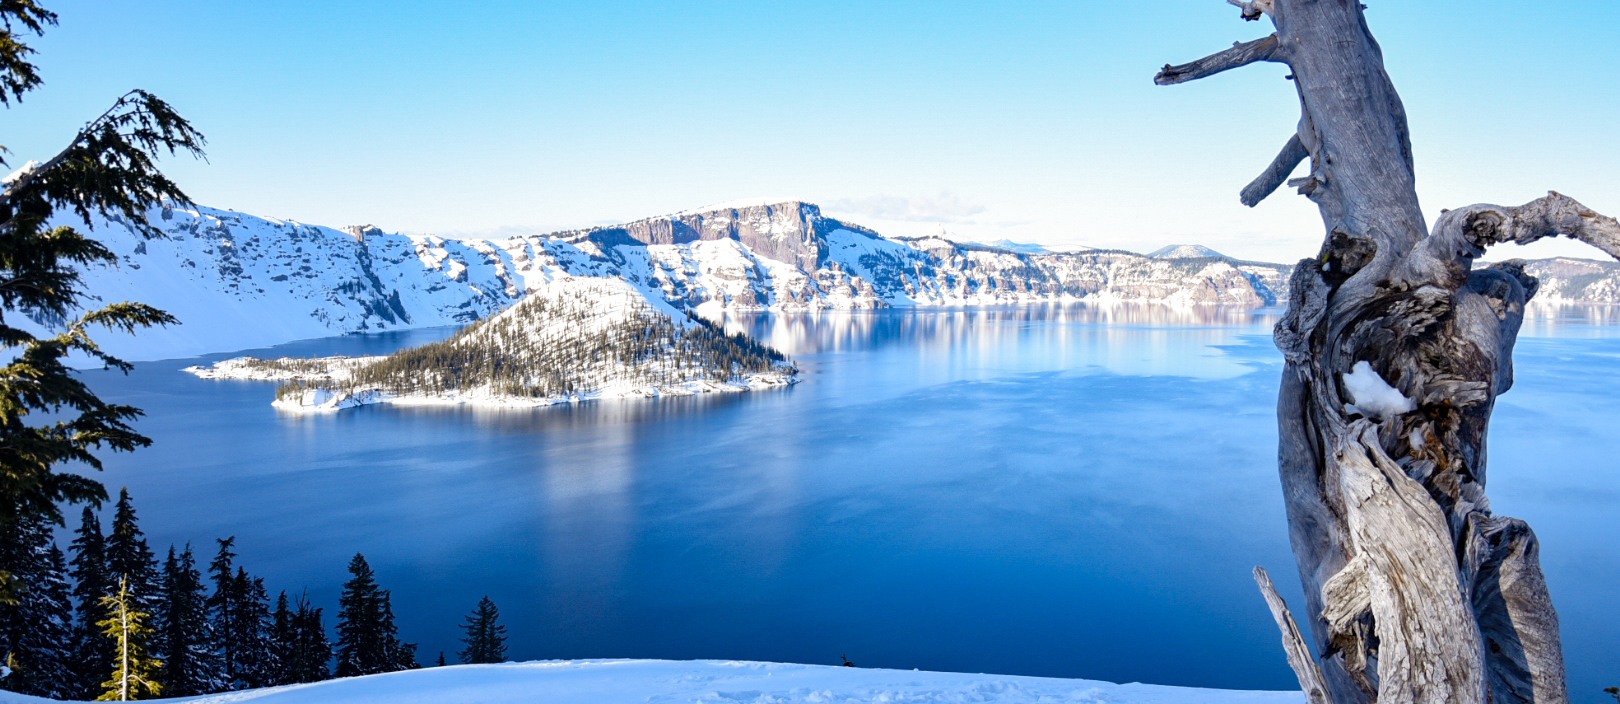 overhead view of crater lake with snow